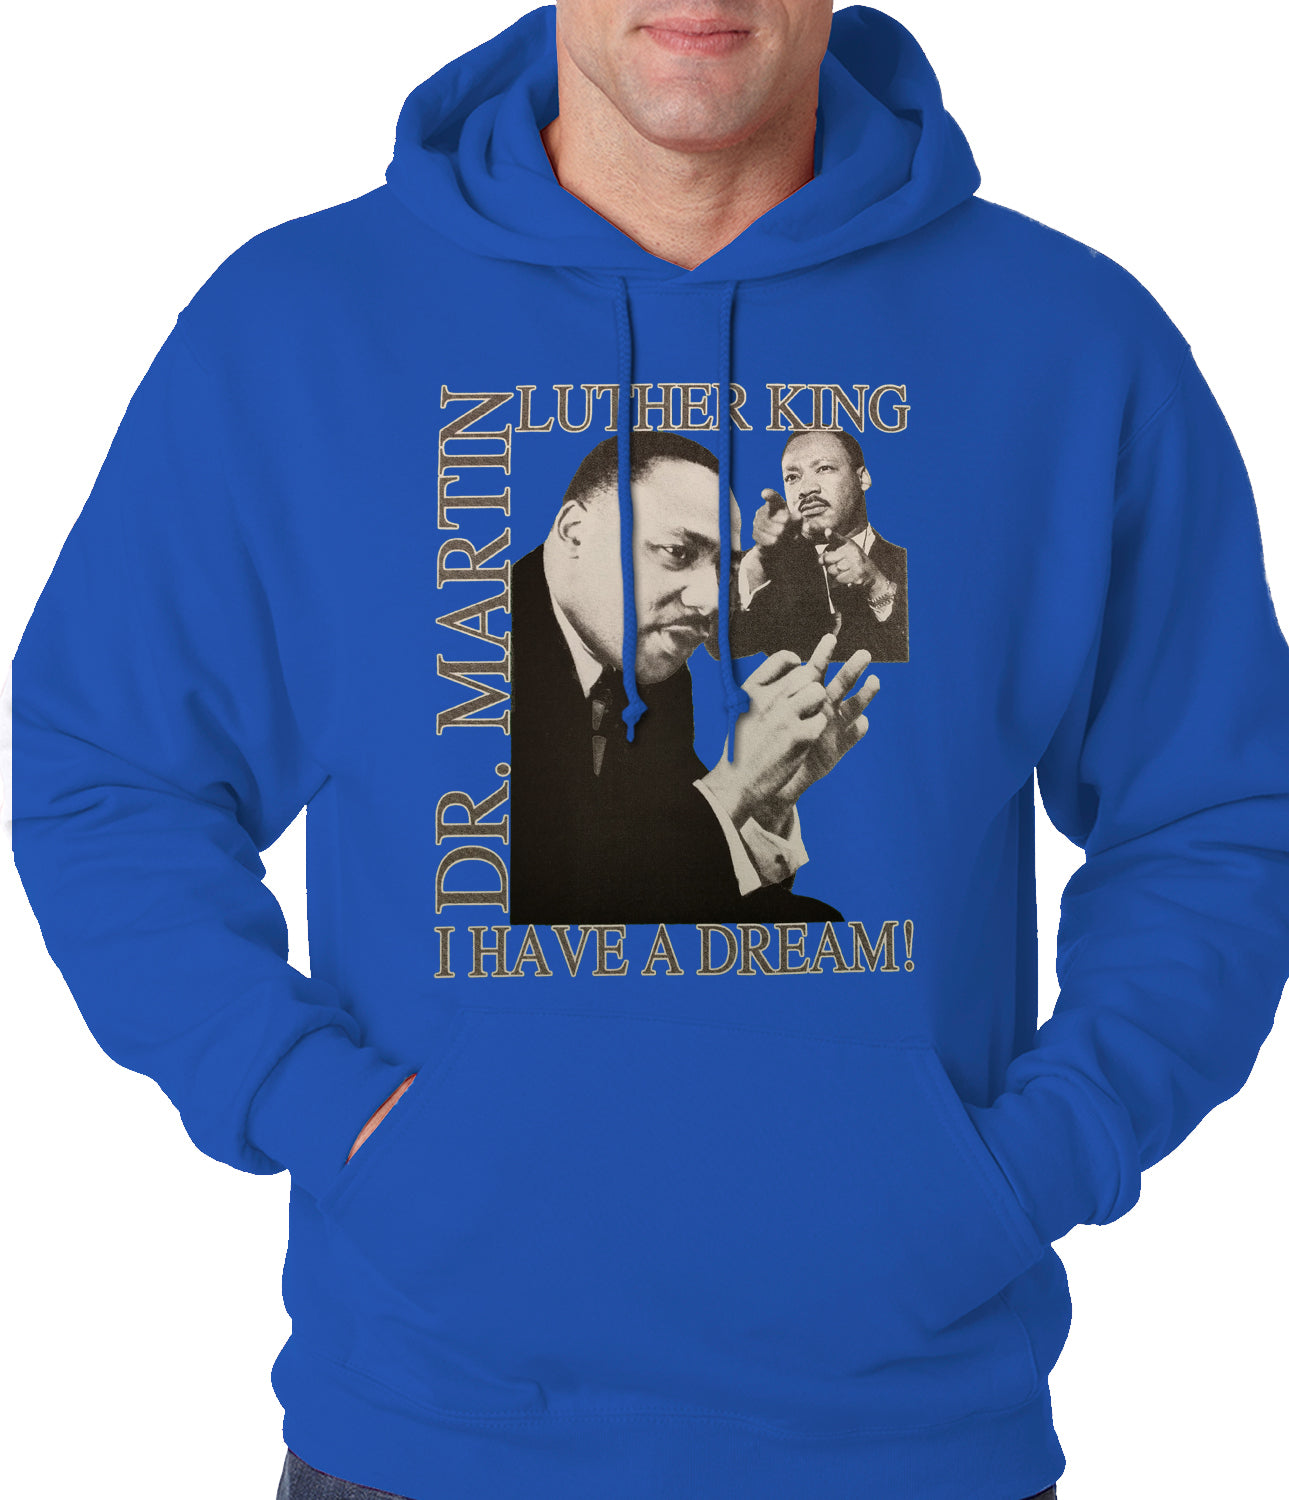 Dr. Martin Luther King Jr. "I Have a Dream" Adult Hoodie